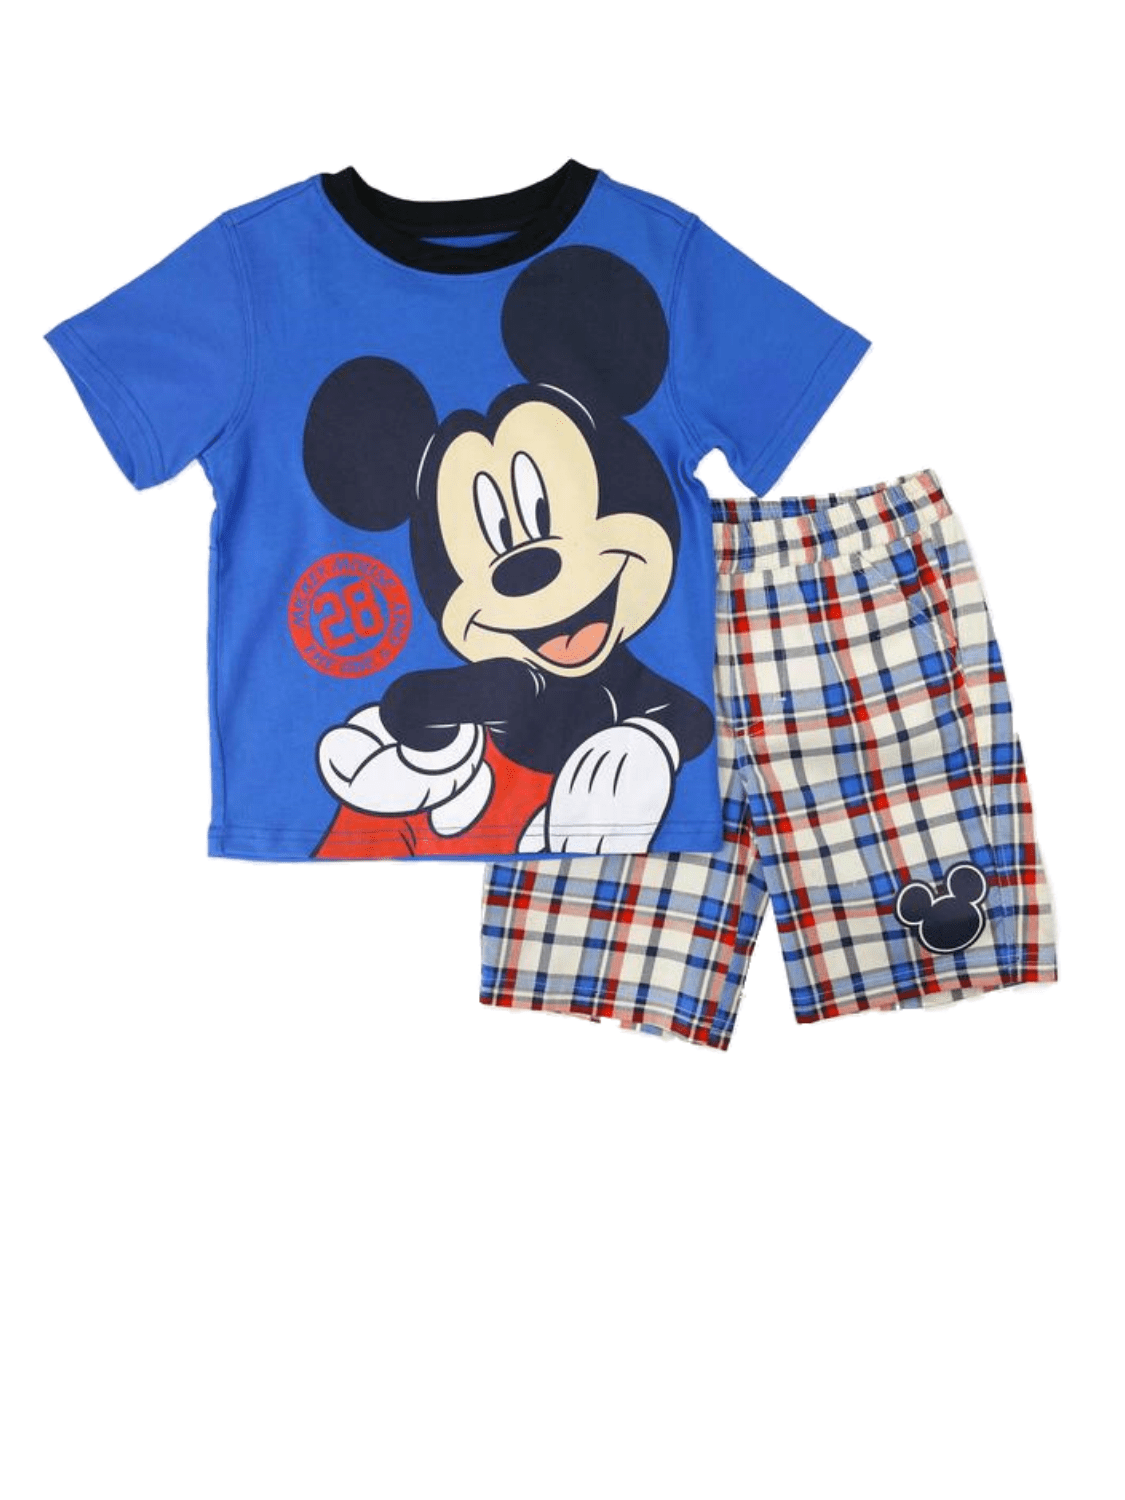 Mickey Striped Details about   Disney Jumping Beans Newborn Boys Shorts